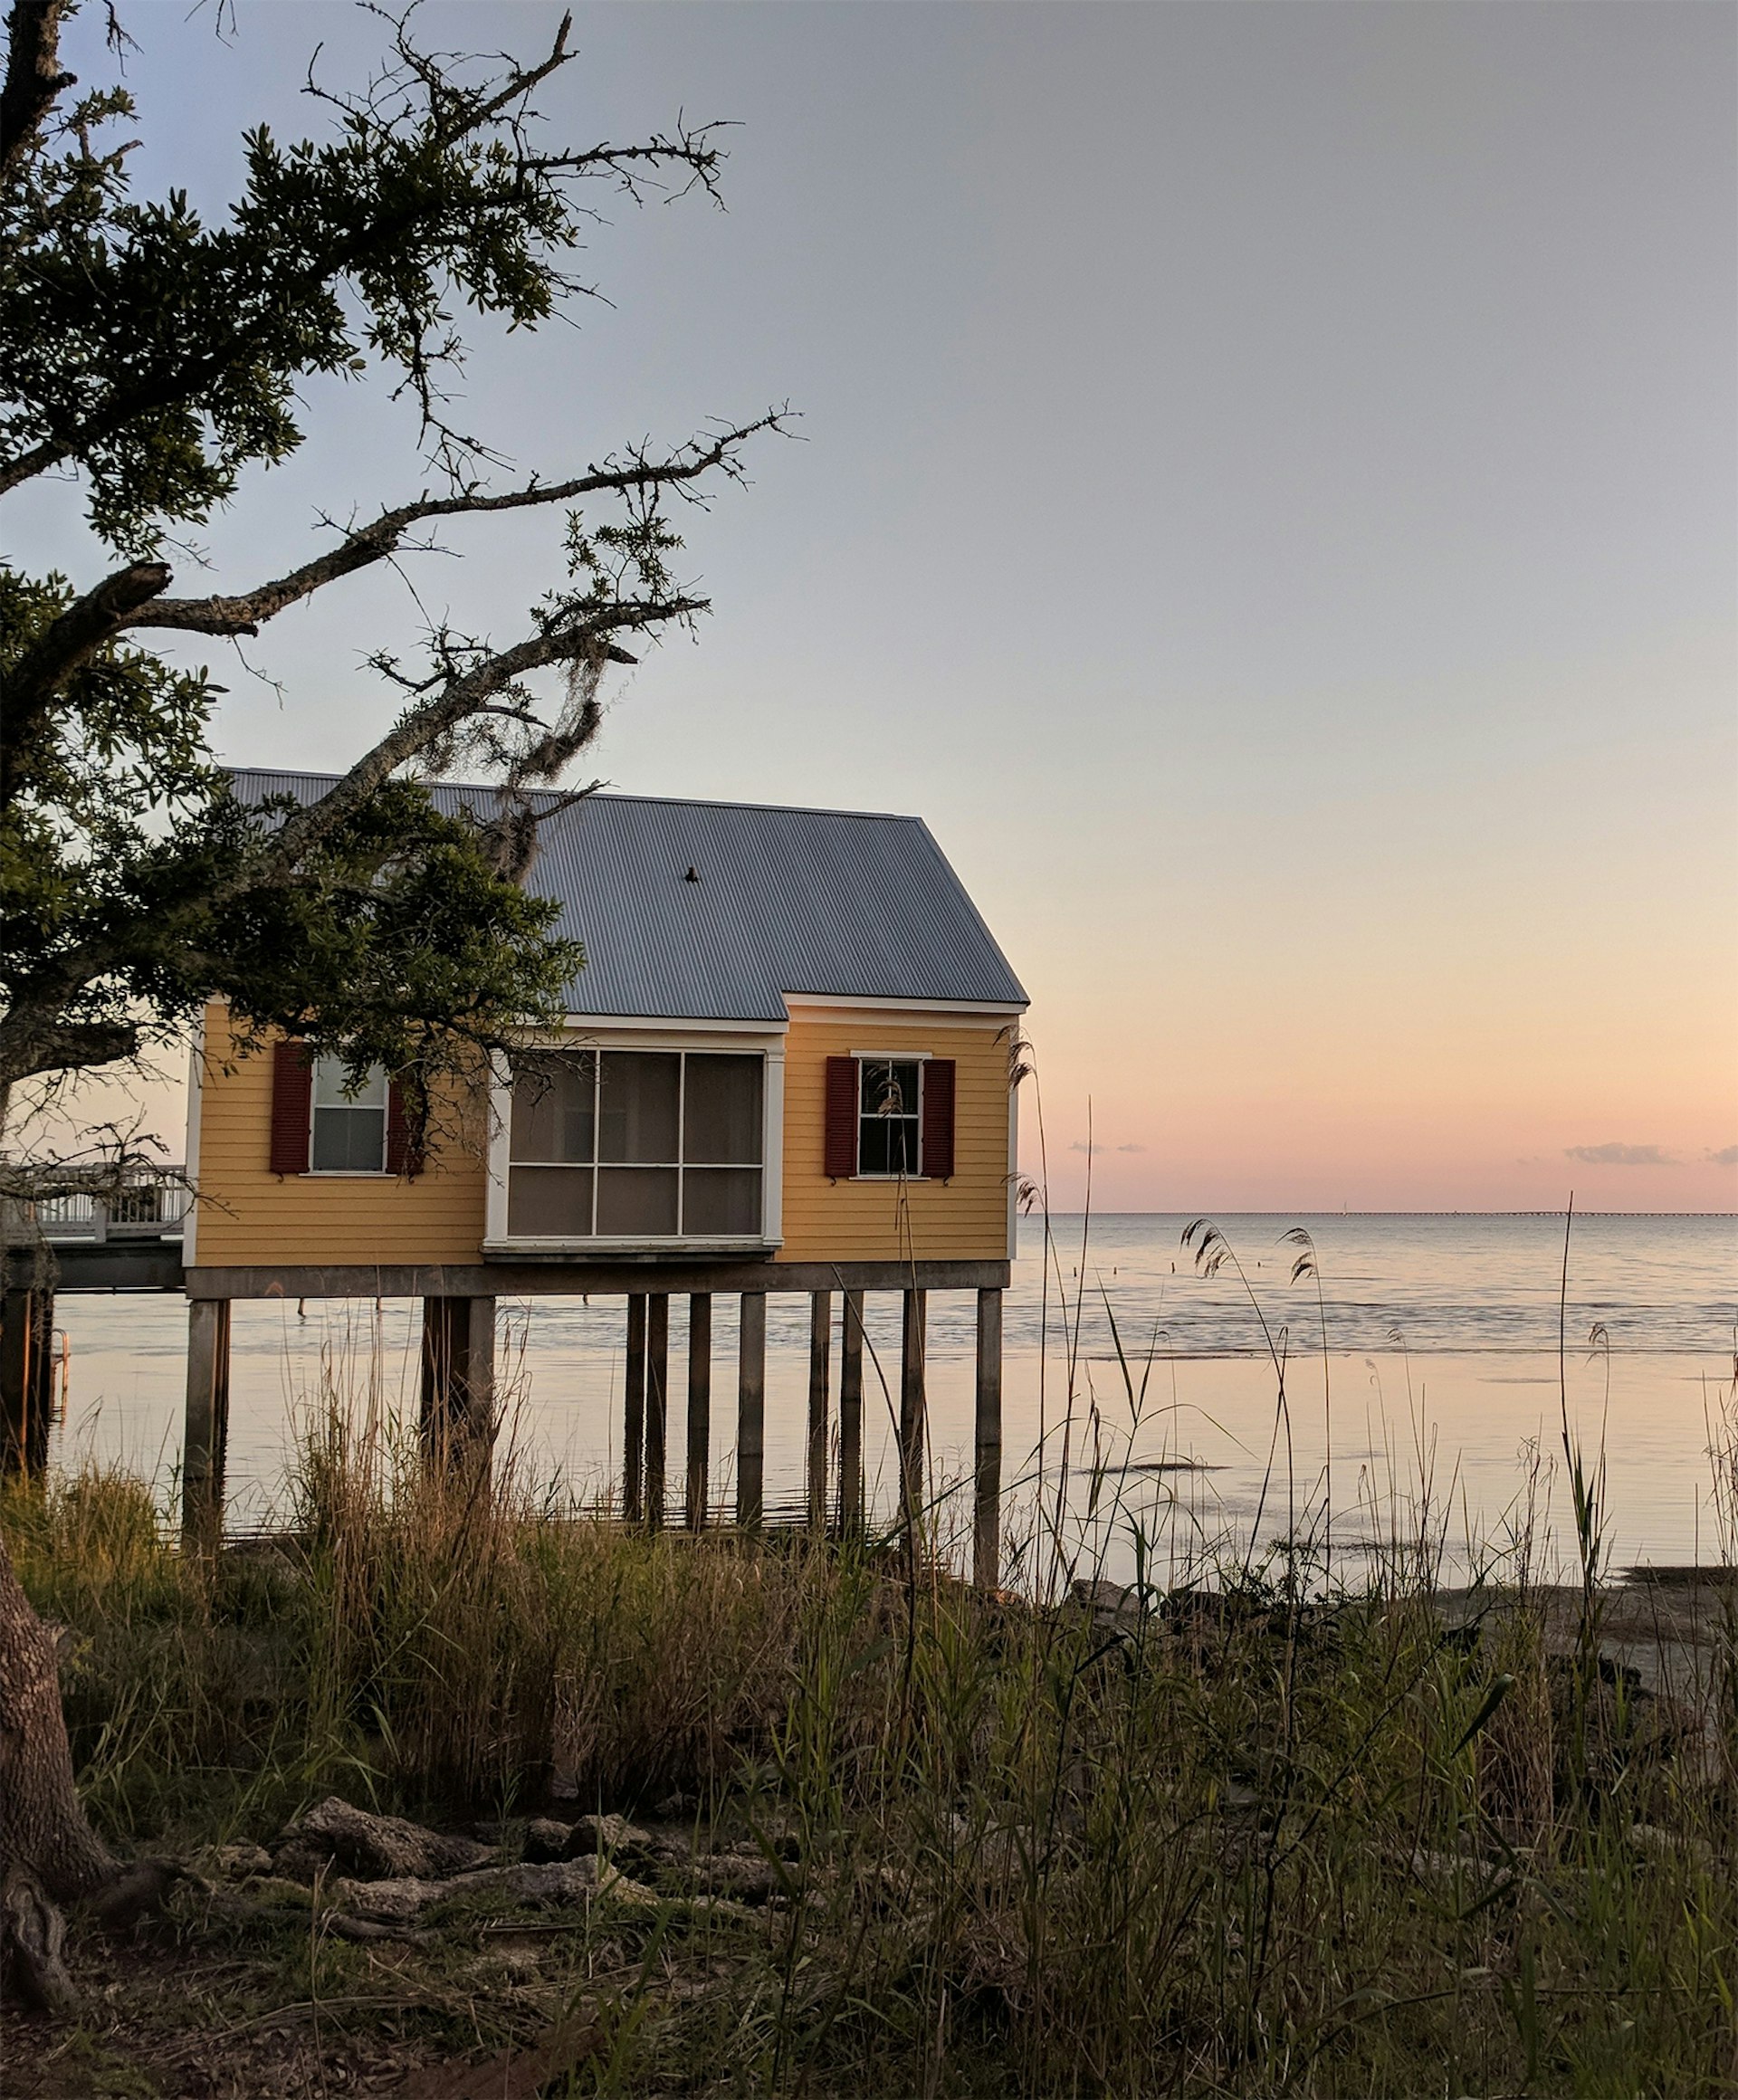 A cabin sits on stilts at sunset on the shore of Lake Pontchartrain in Louisiana © Adam Karlin / Lonely Planet